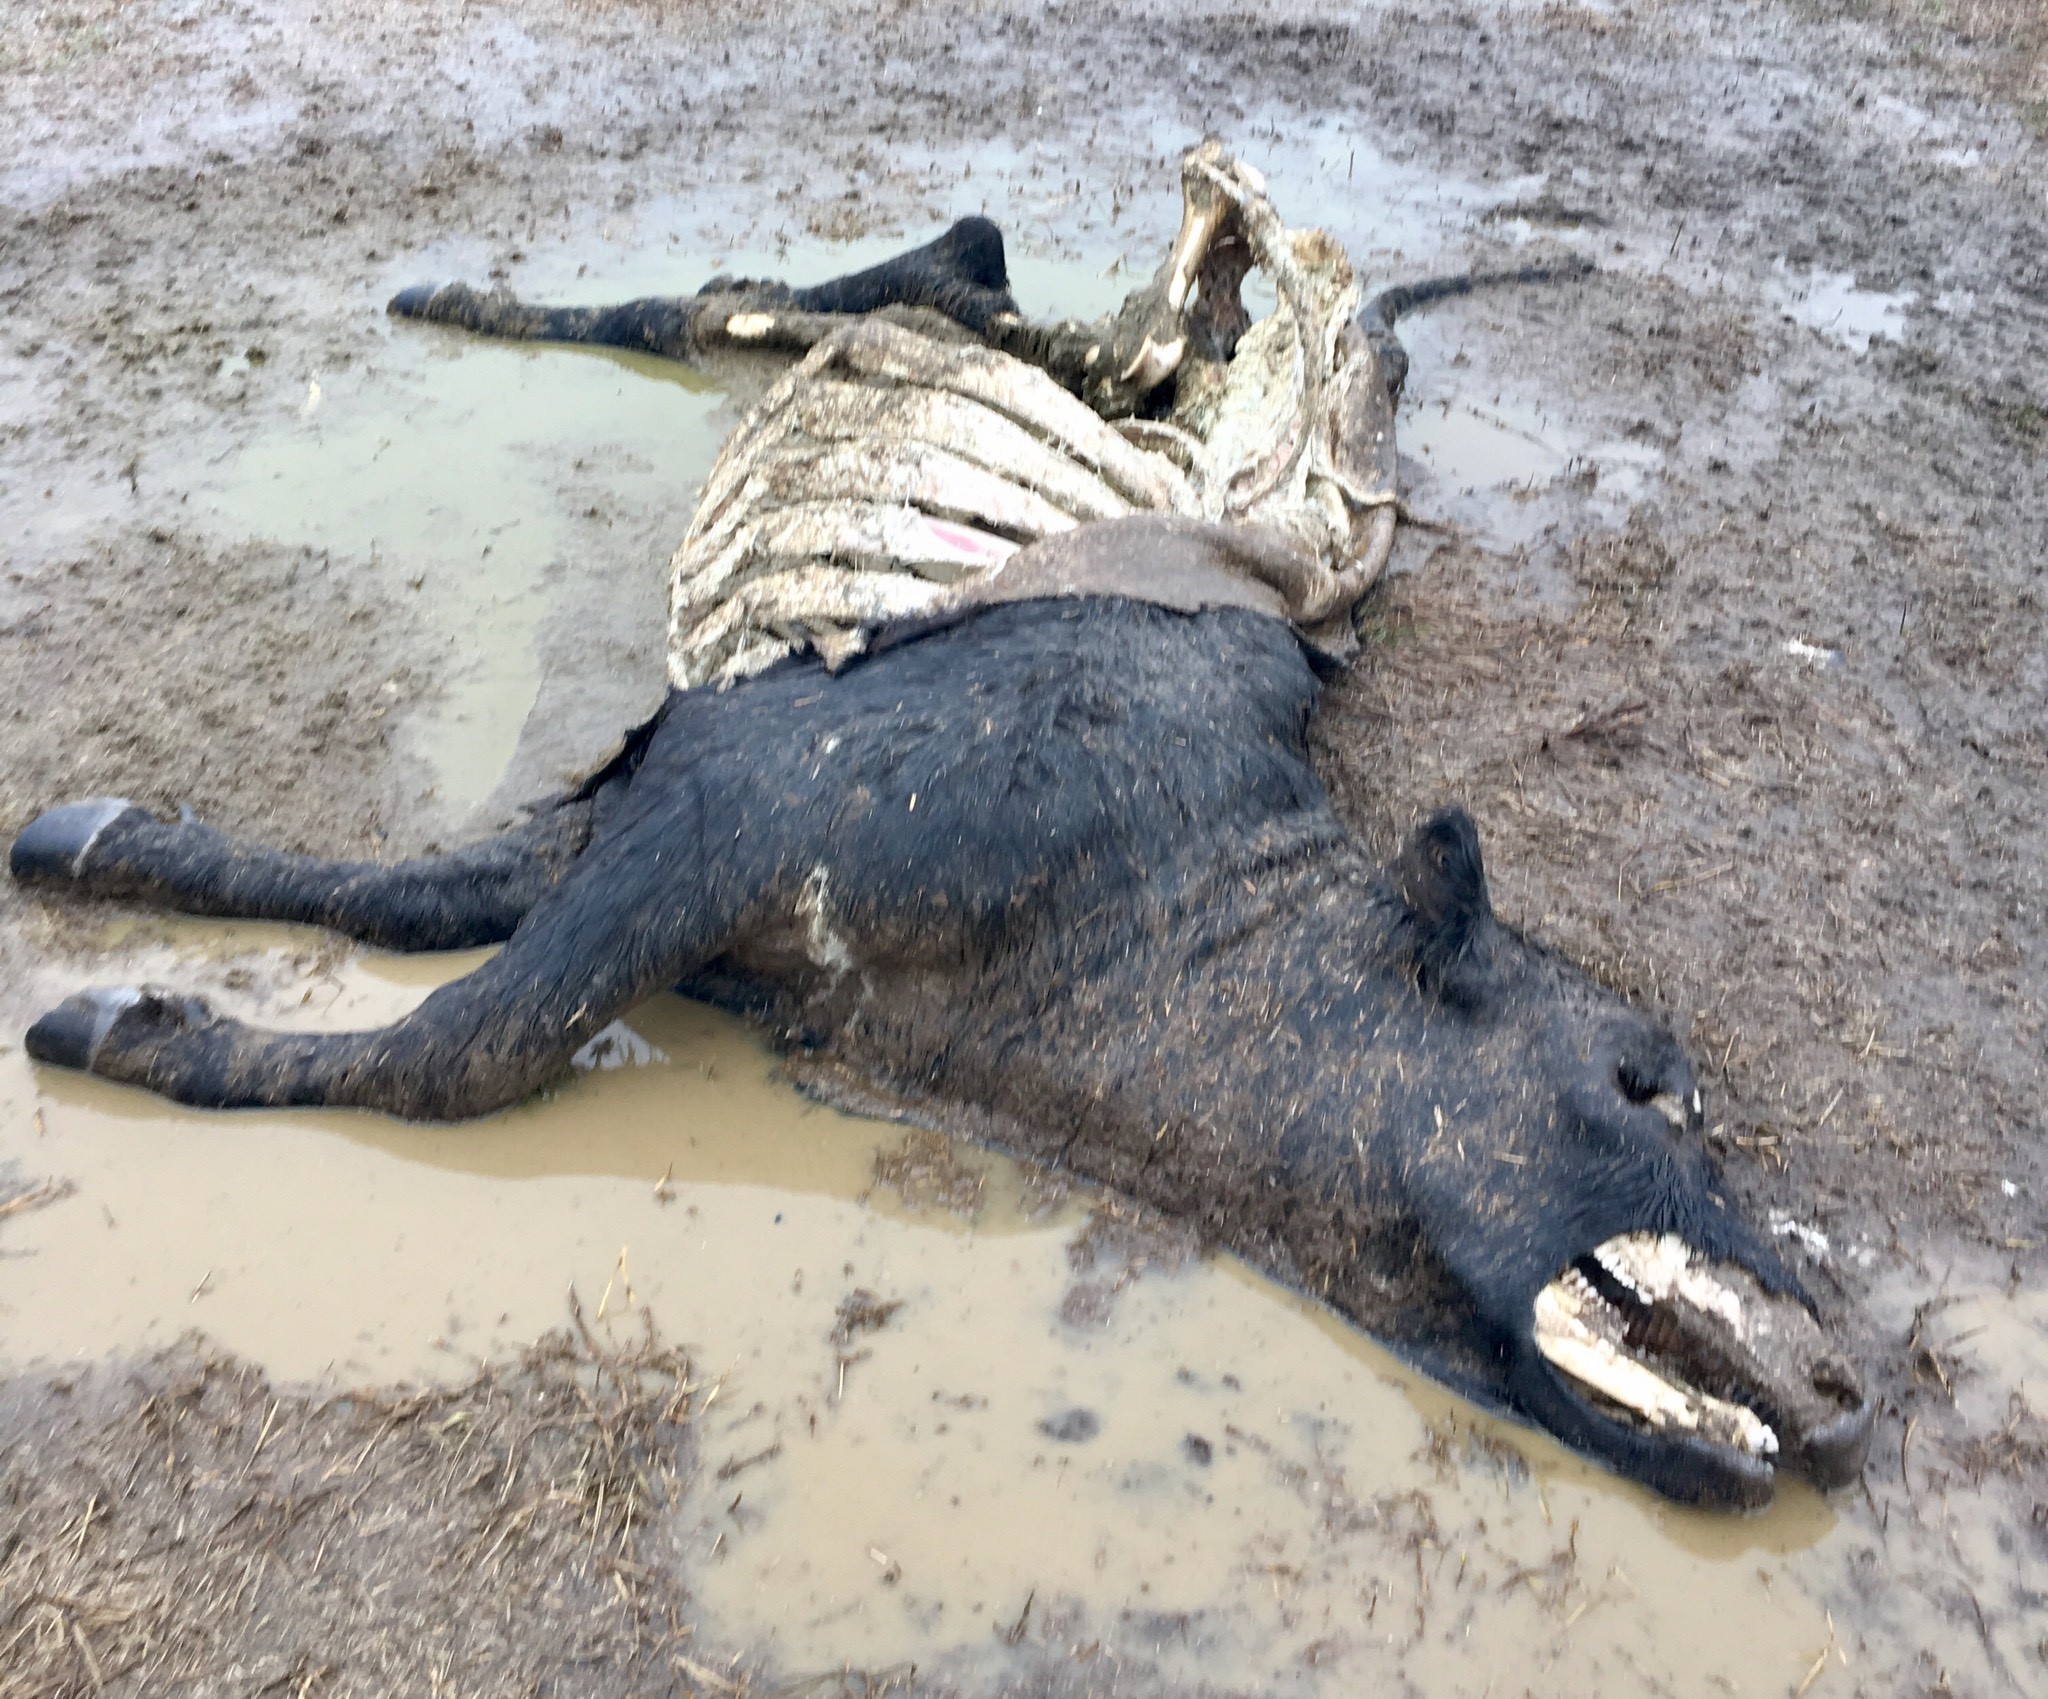 A dead black cow with rib bones and partial jaw bones showing, no eyes